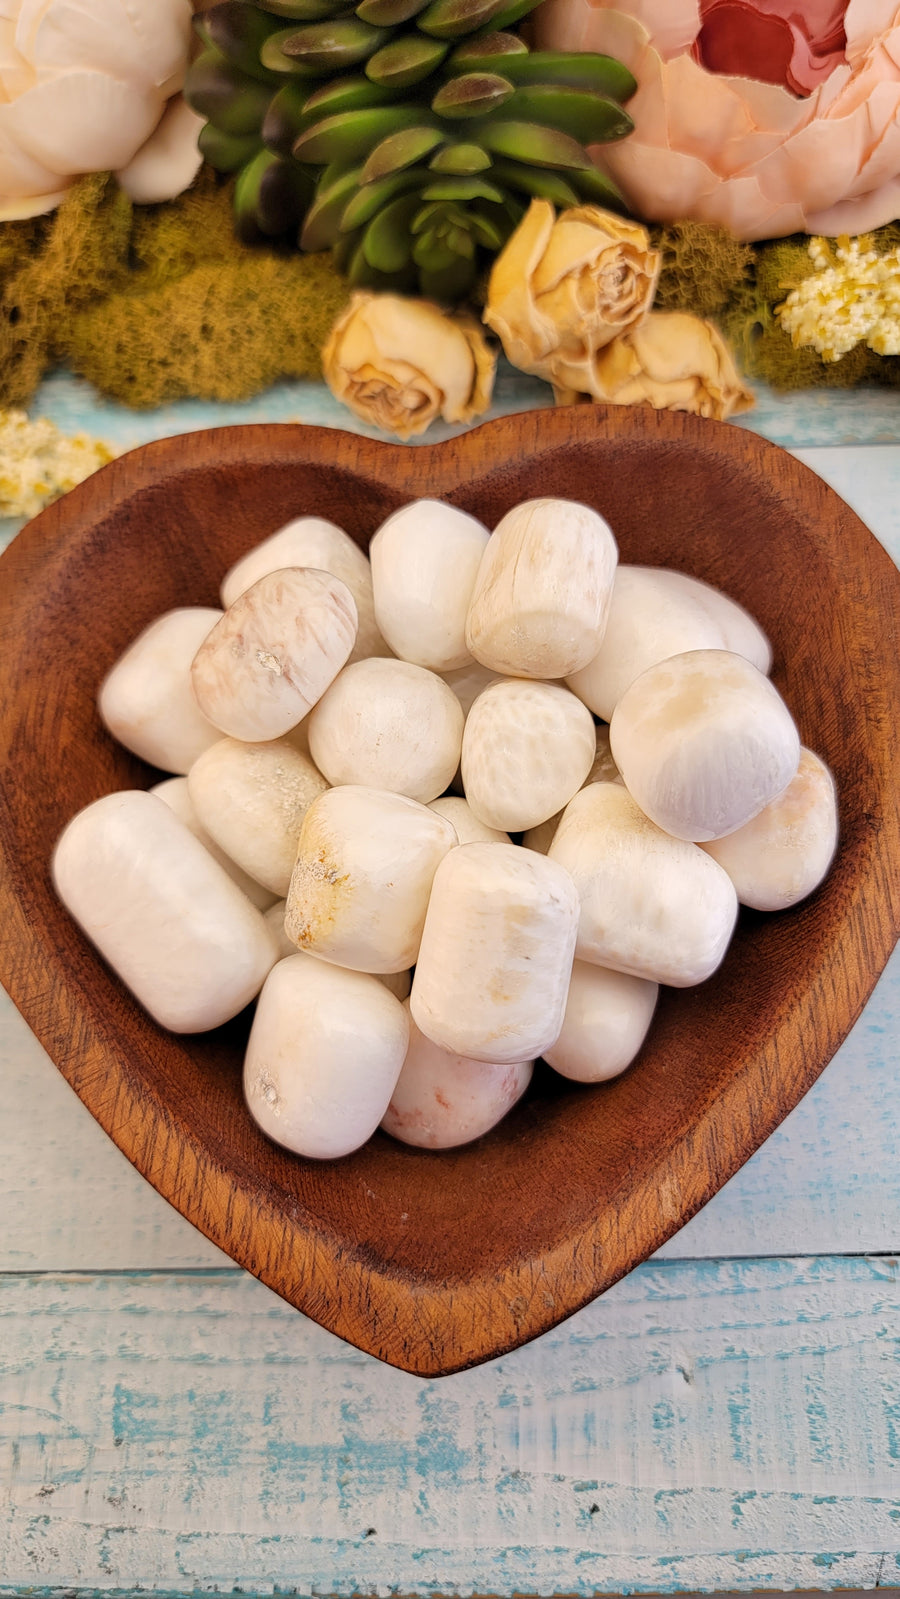 tumbled scolecite stones in wooden heart bowl